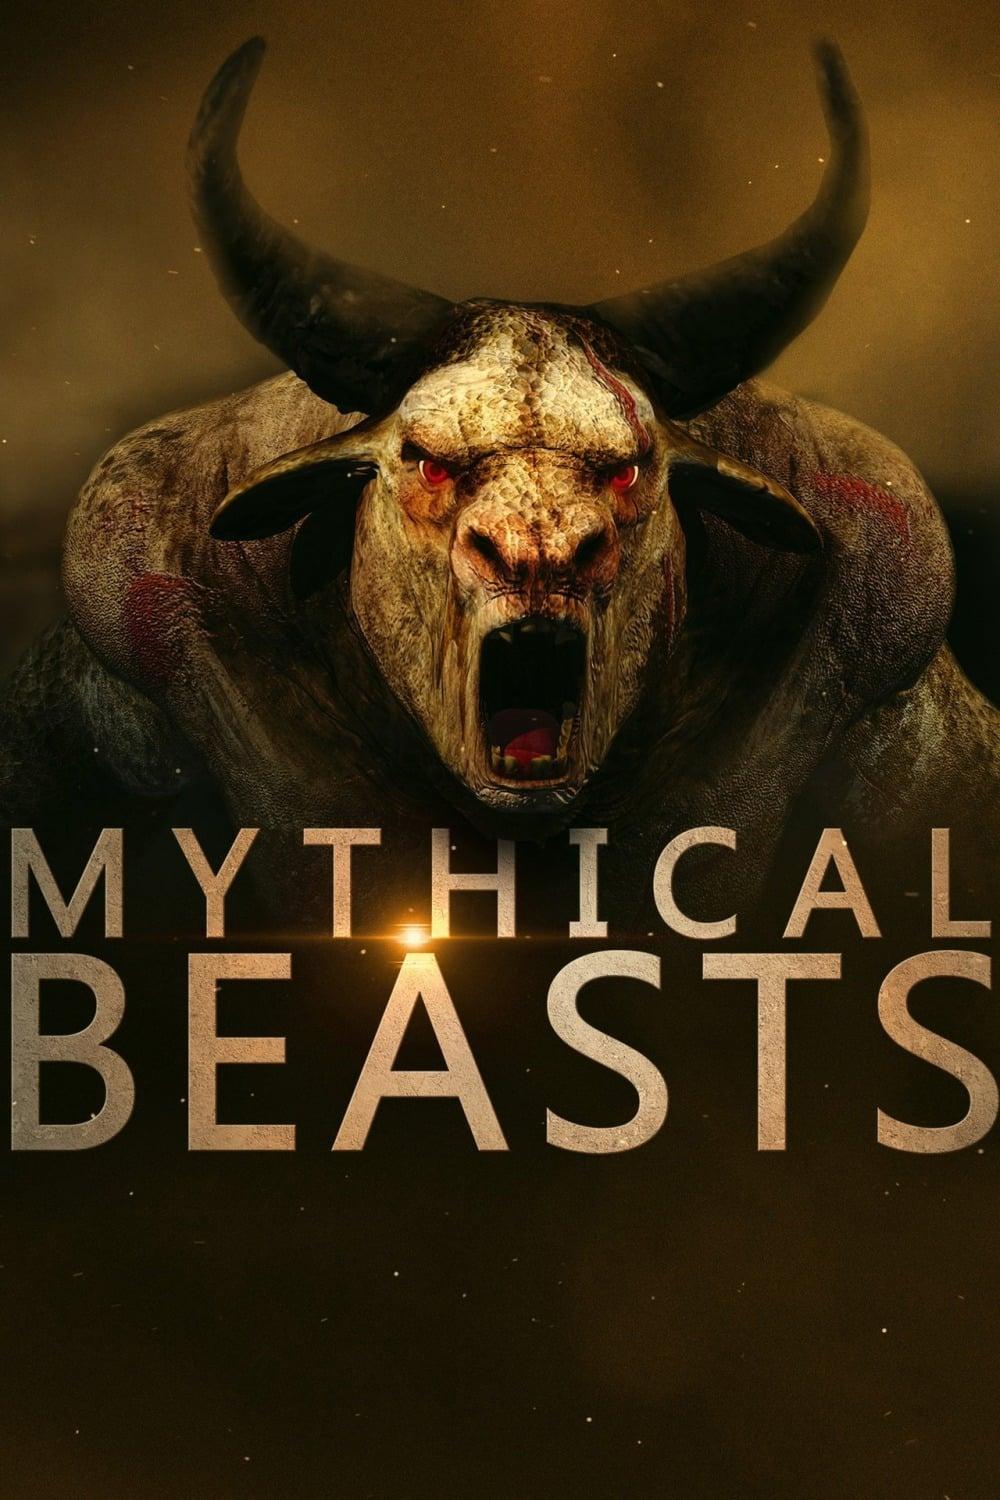 Mythical Beasts poster